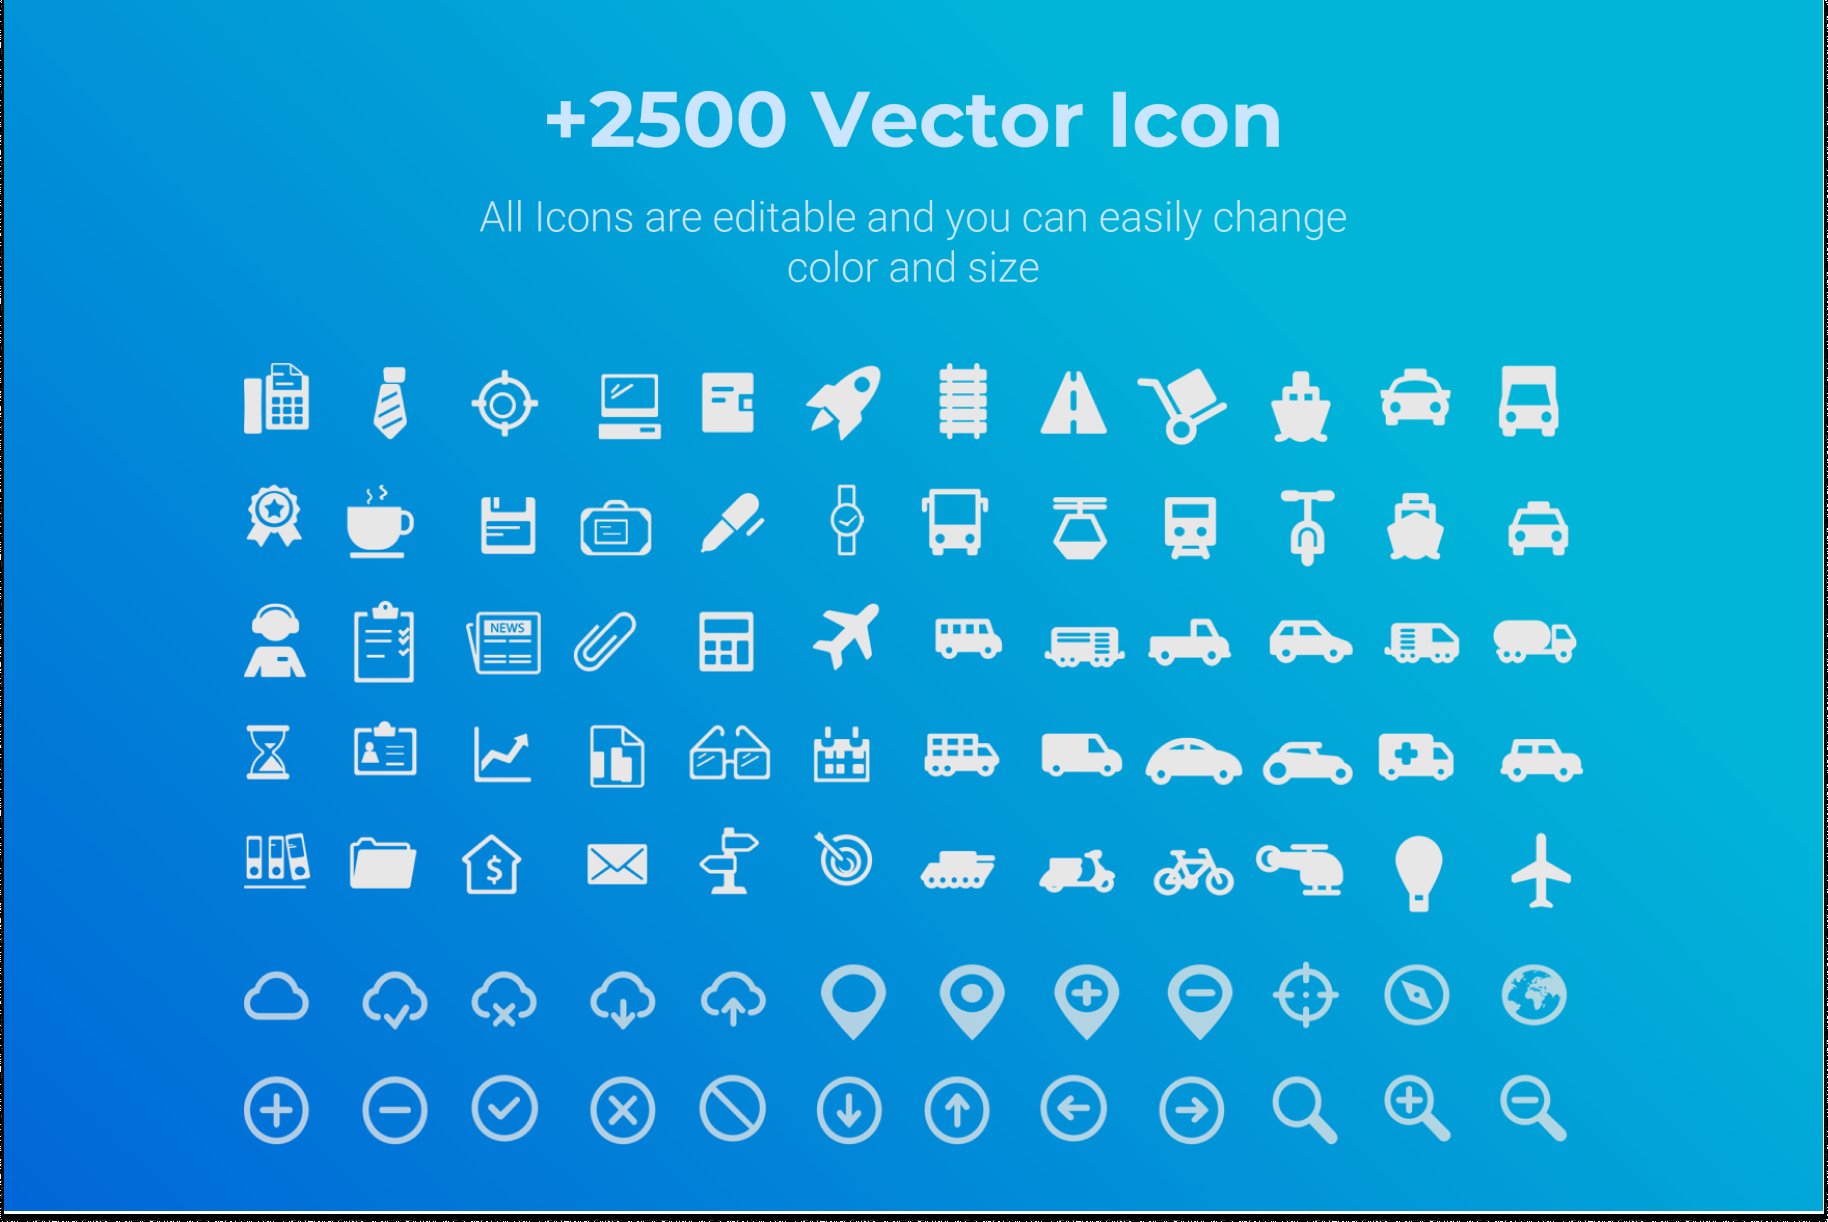 Template contains a lot of vector icons.